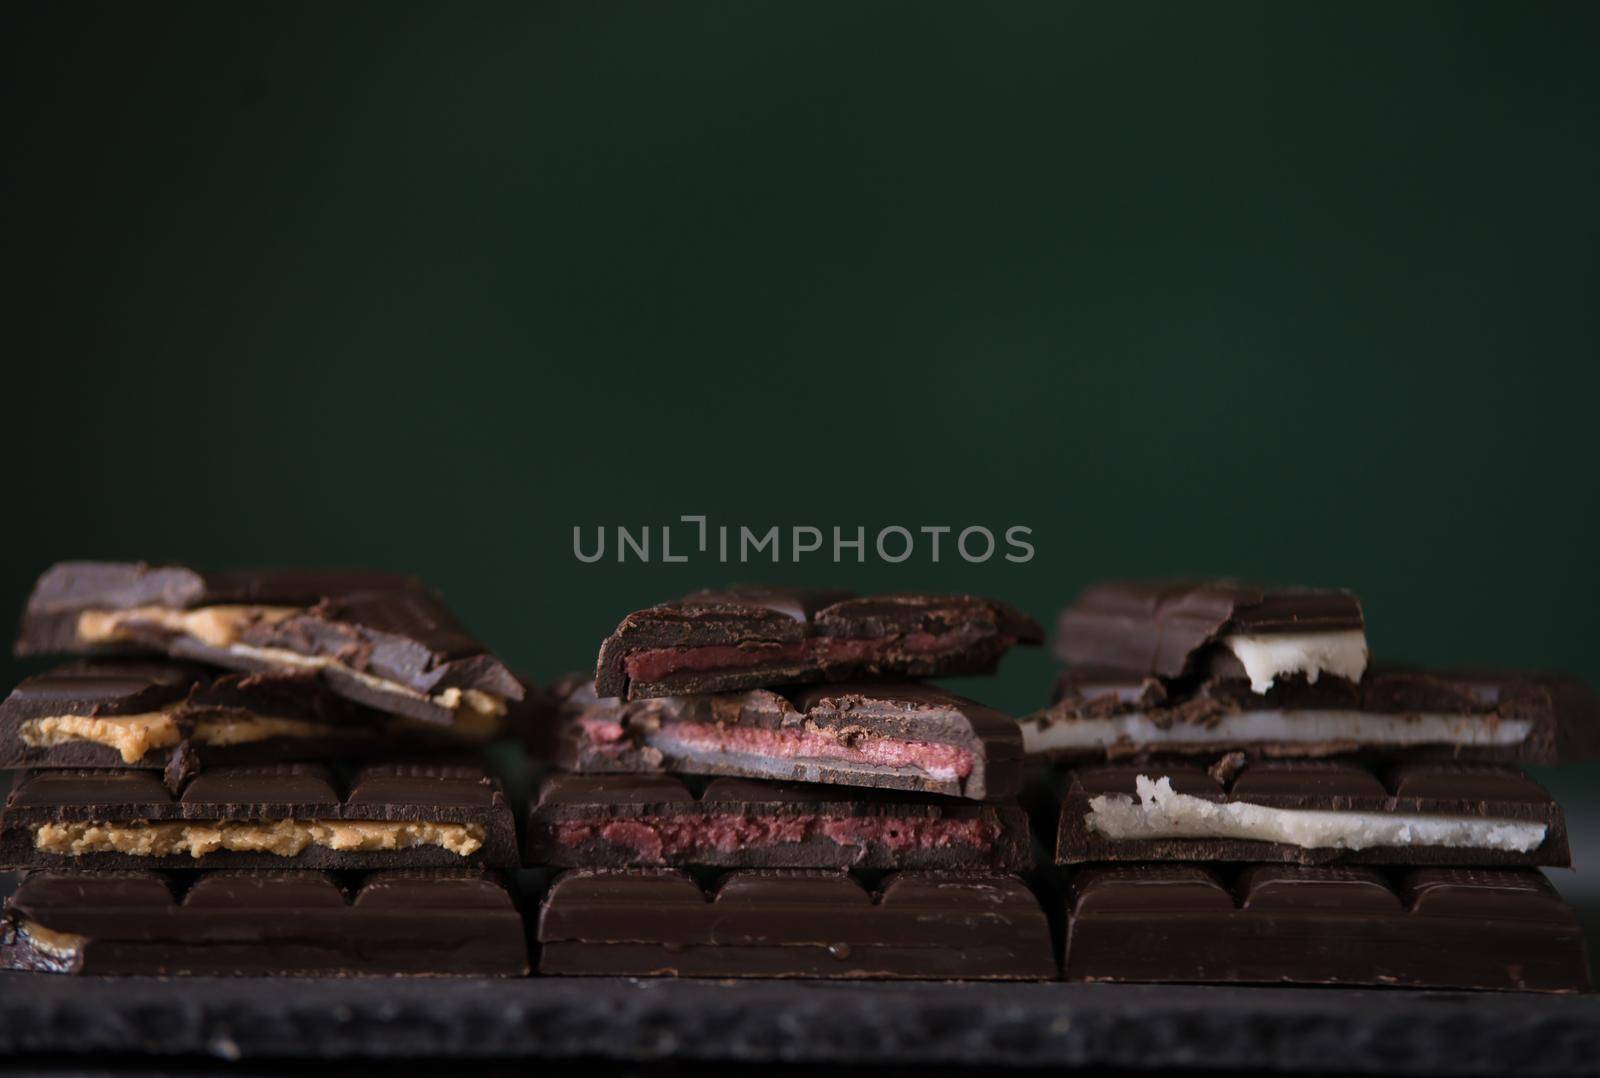 variety of homemade chocolate with different fillings. dark food photo